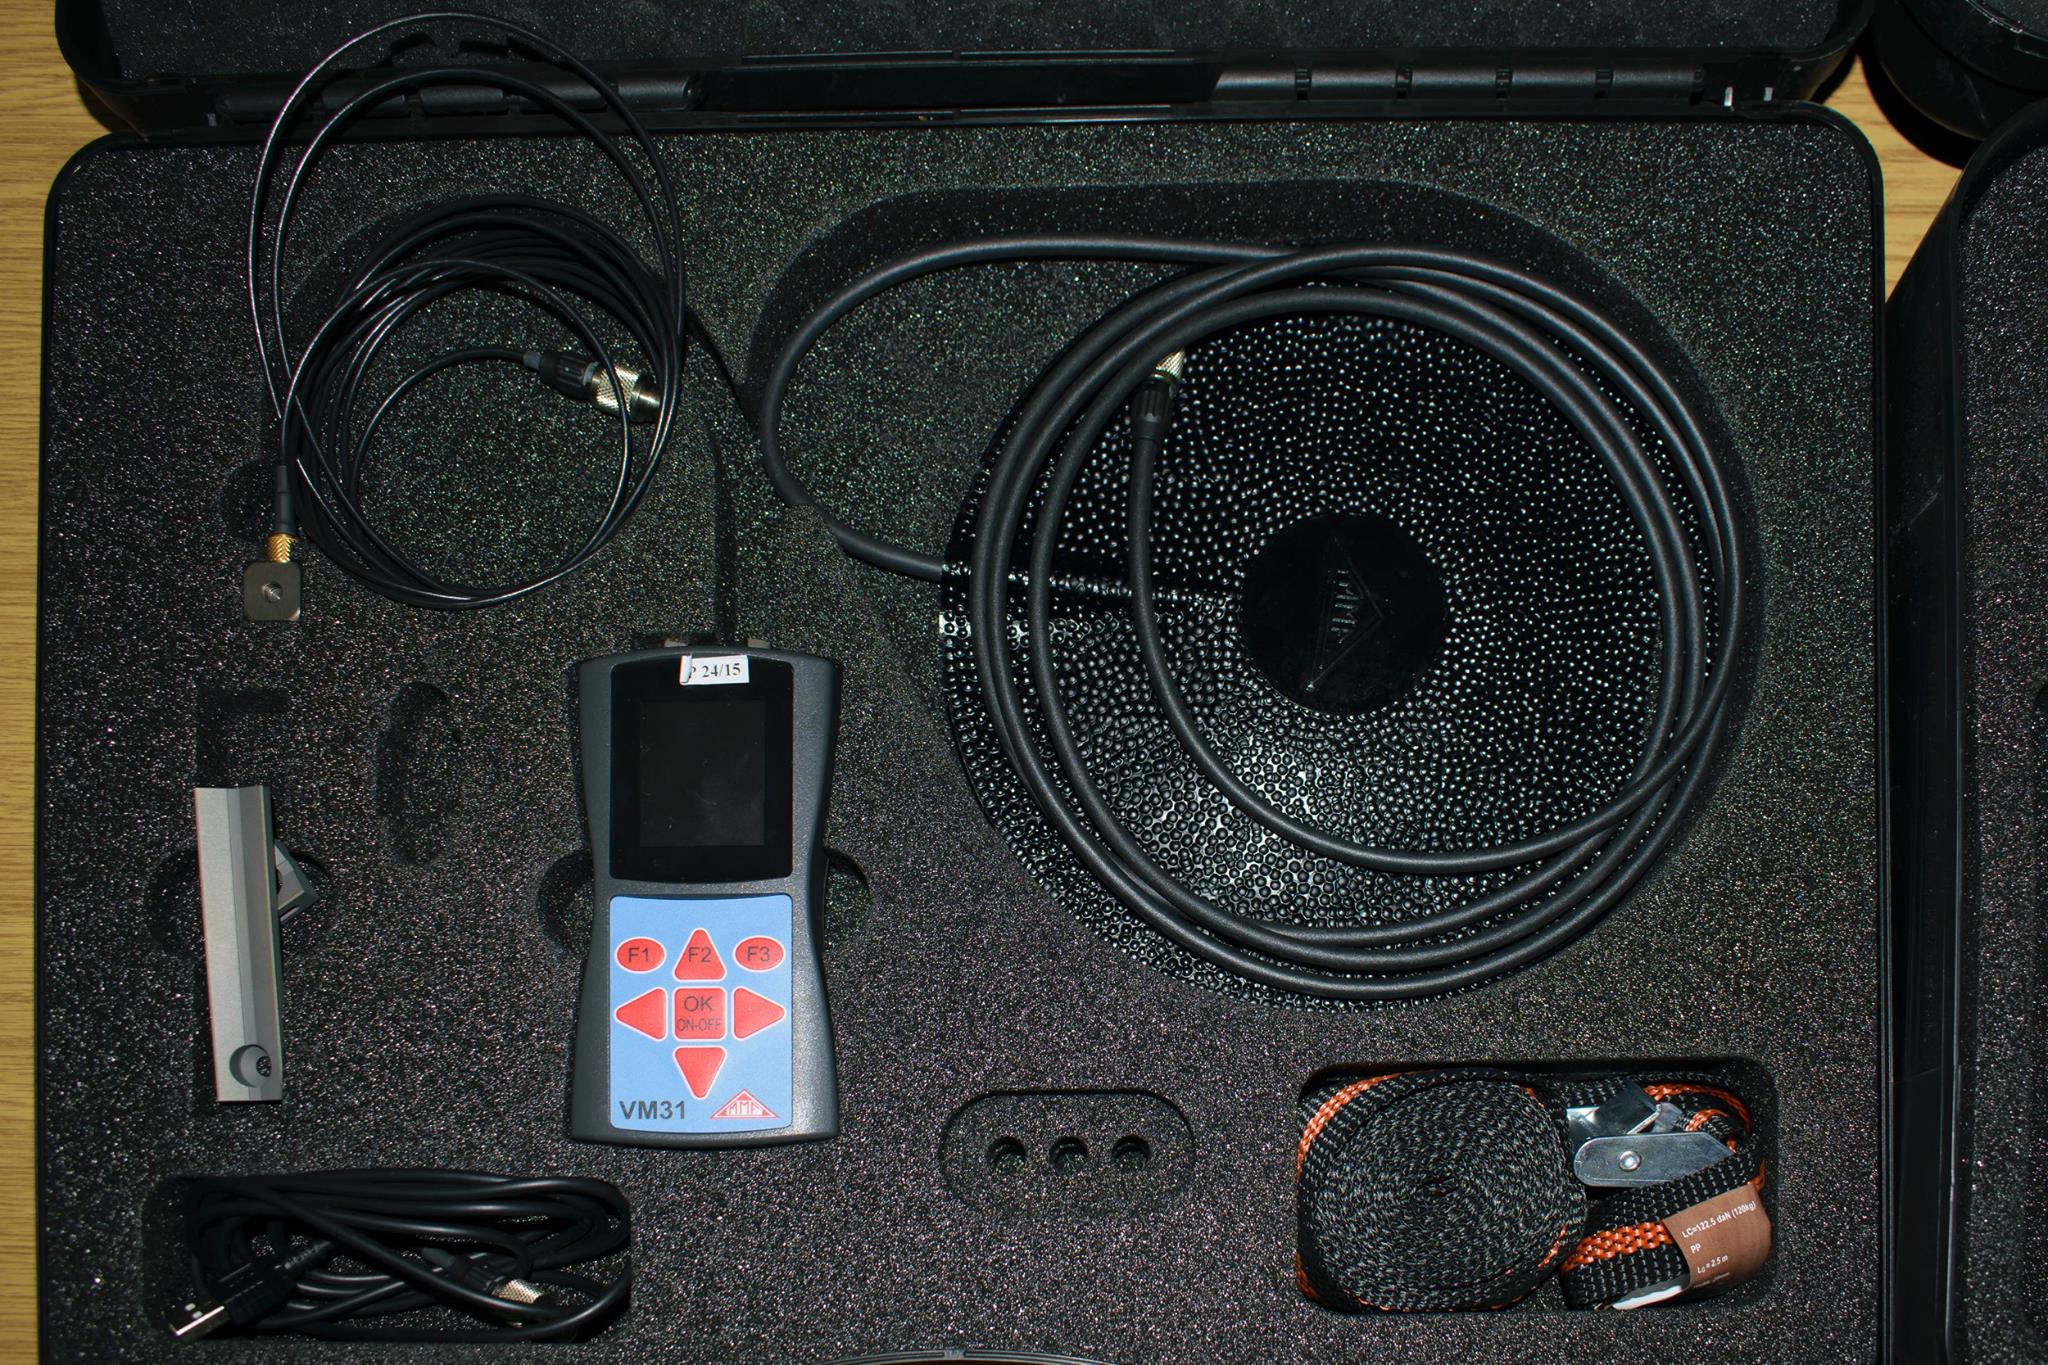 Noise measurement device in the box